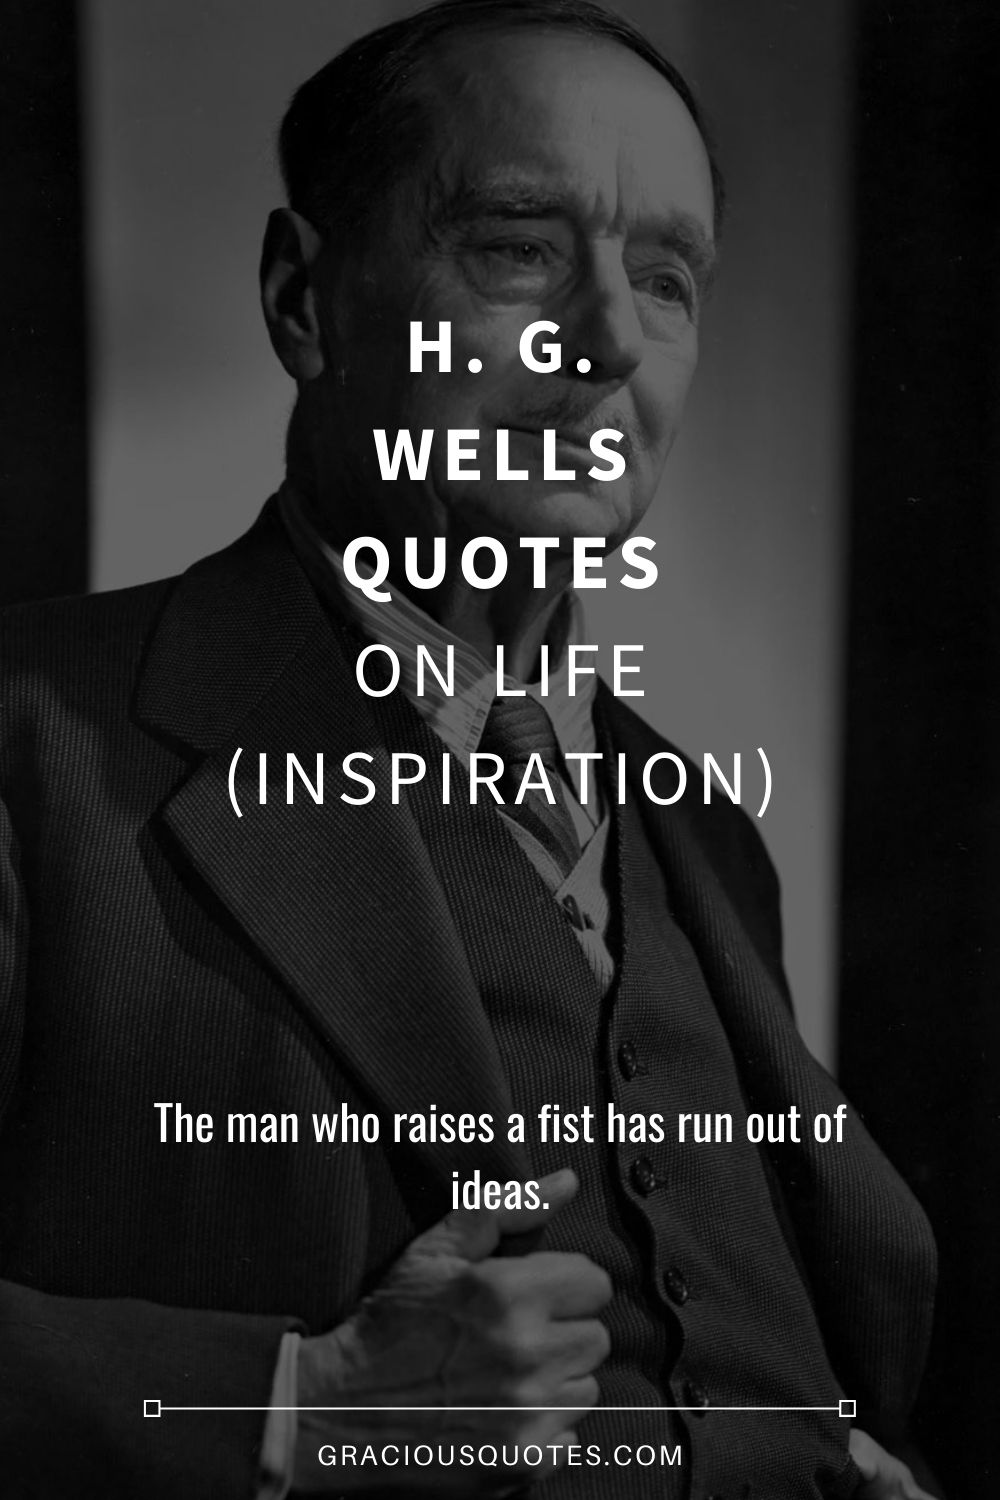 H. G. Wells Quotes on Life (INSPIRATION) - Gracious Quotes